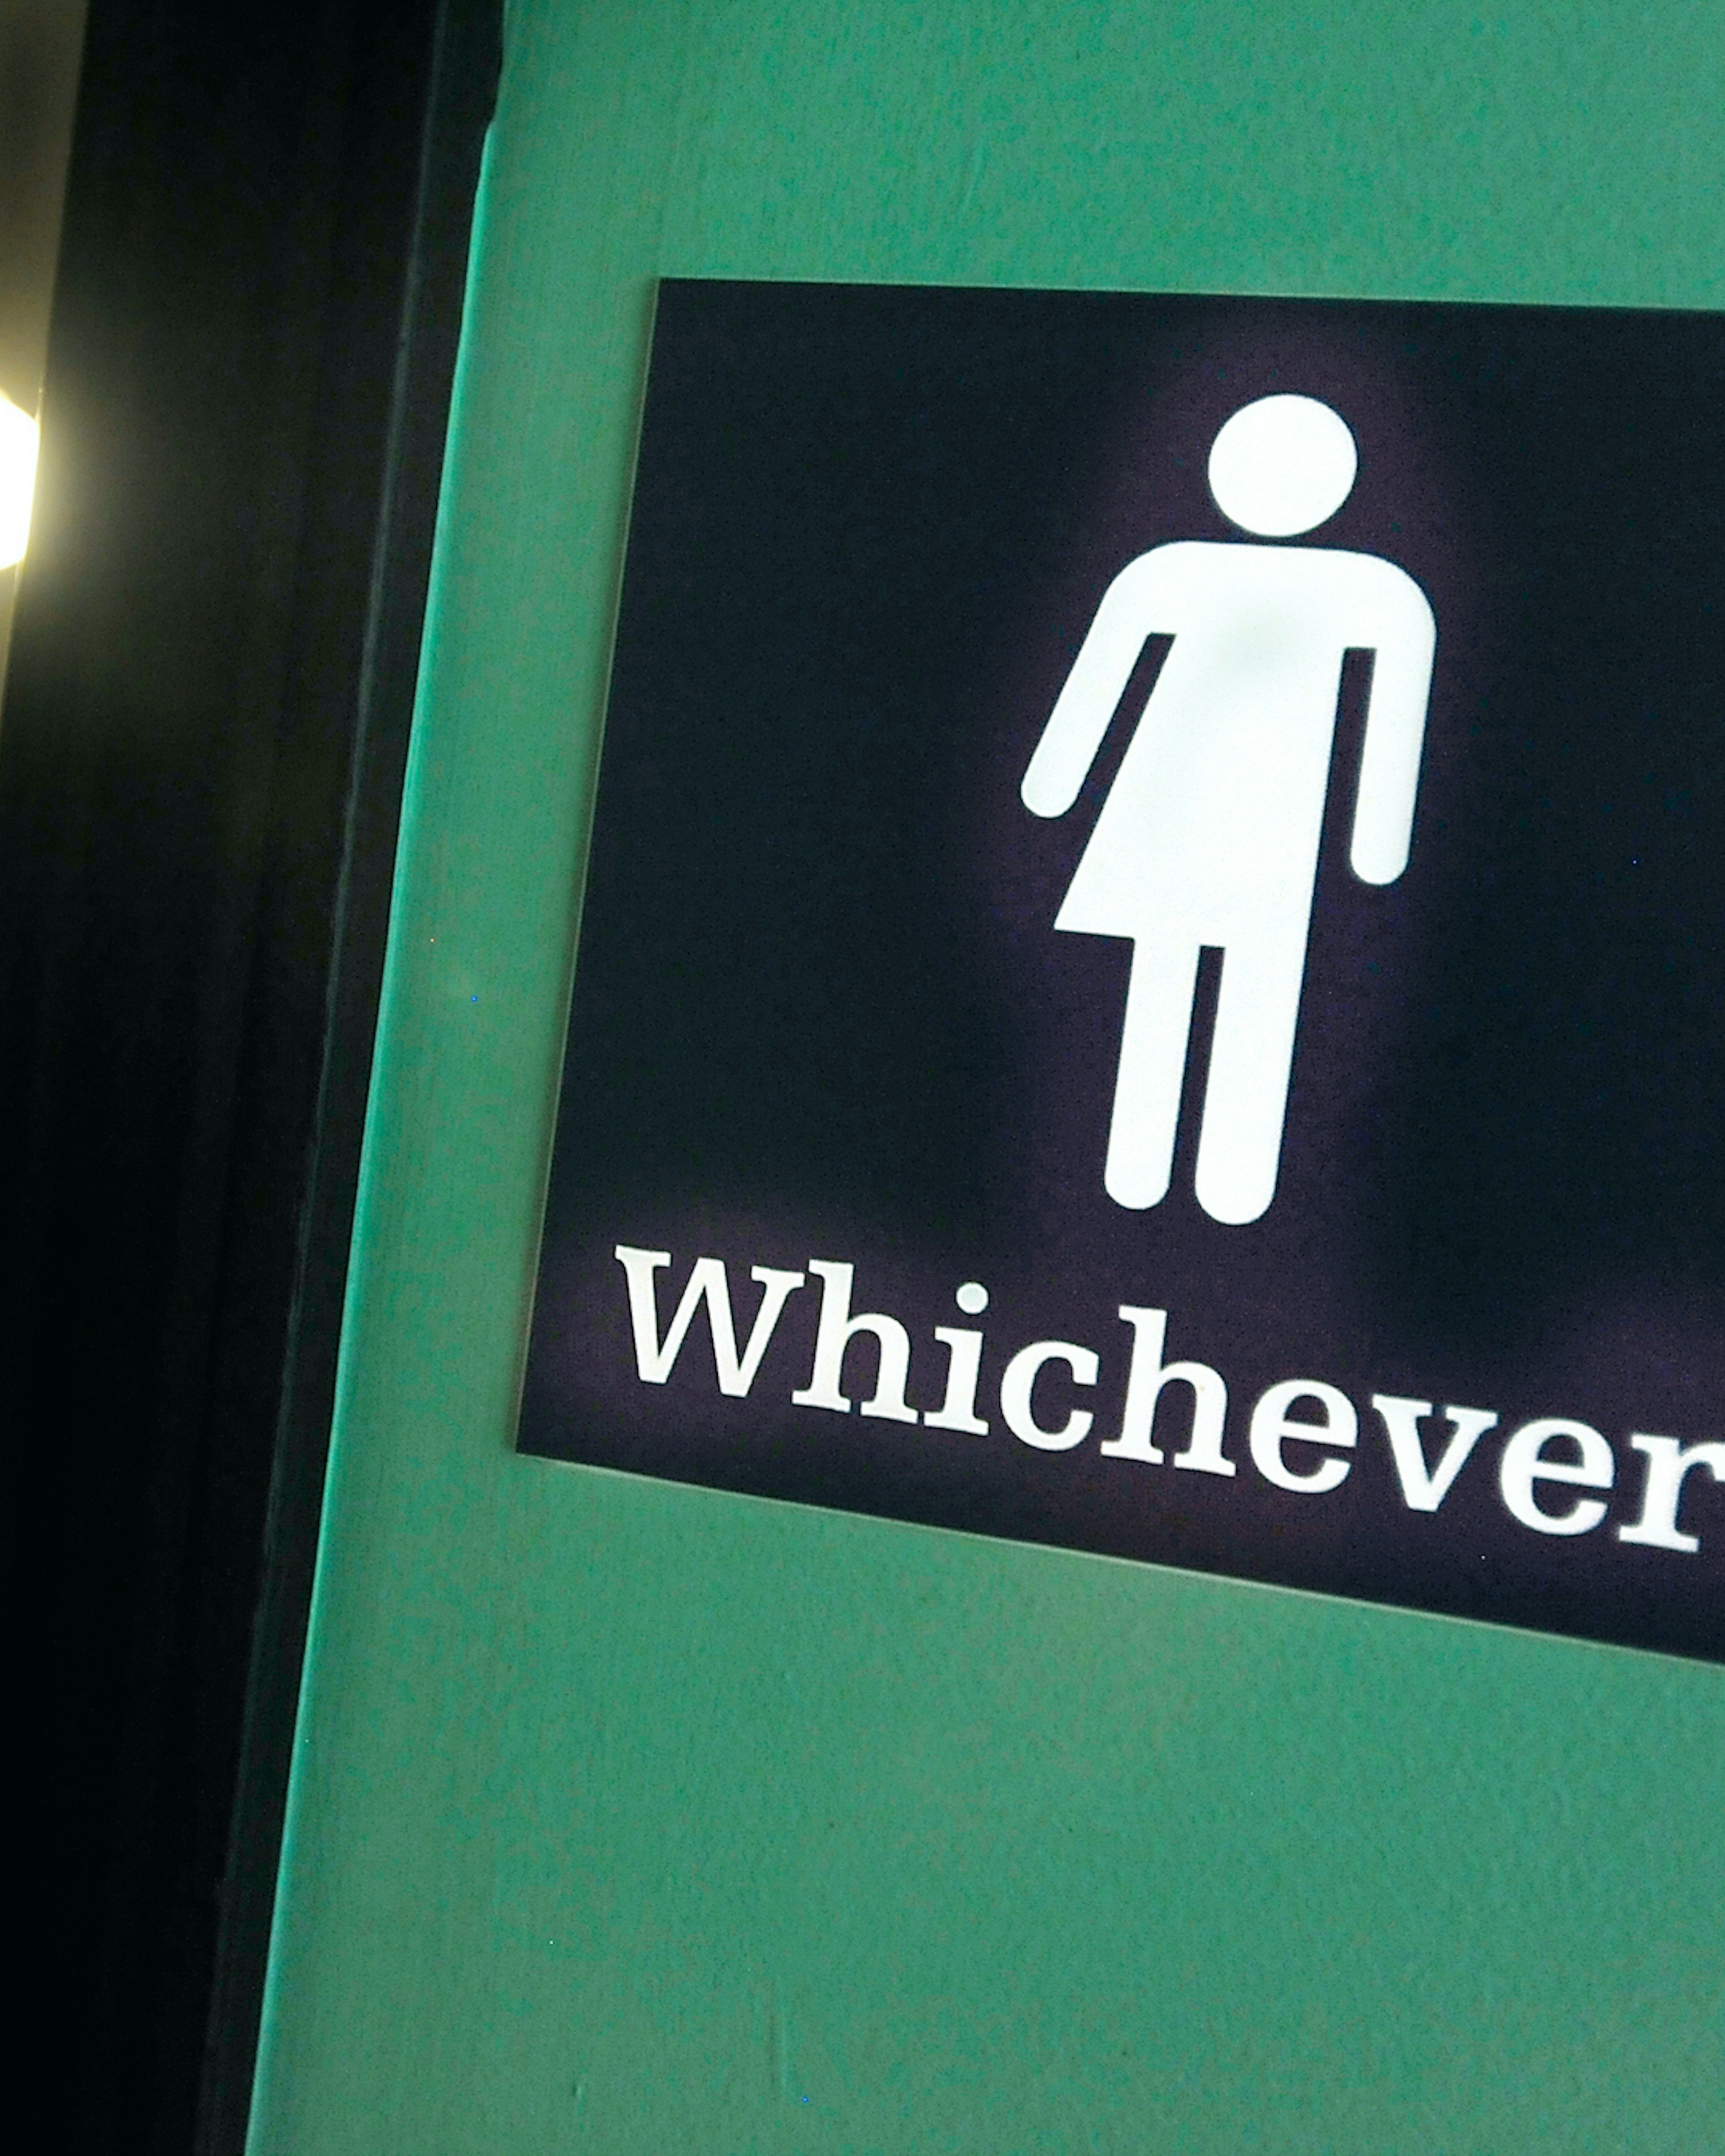 A gender neutral sign is posted outside a bathrooms at Oval Park Grill on May 11, 2016 in Durham, North Carolina. (Photo by Sara D. Davis/Getty Images)